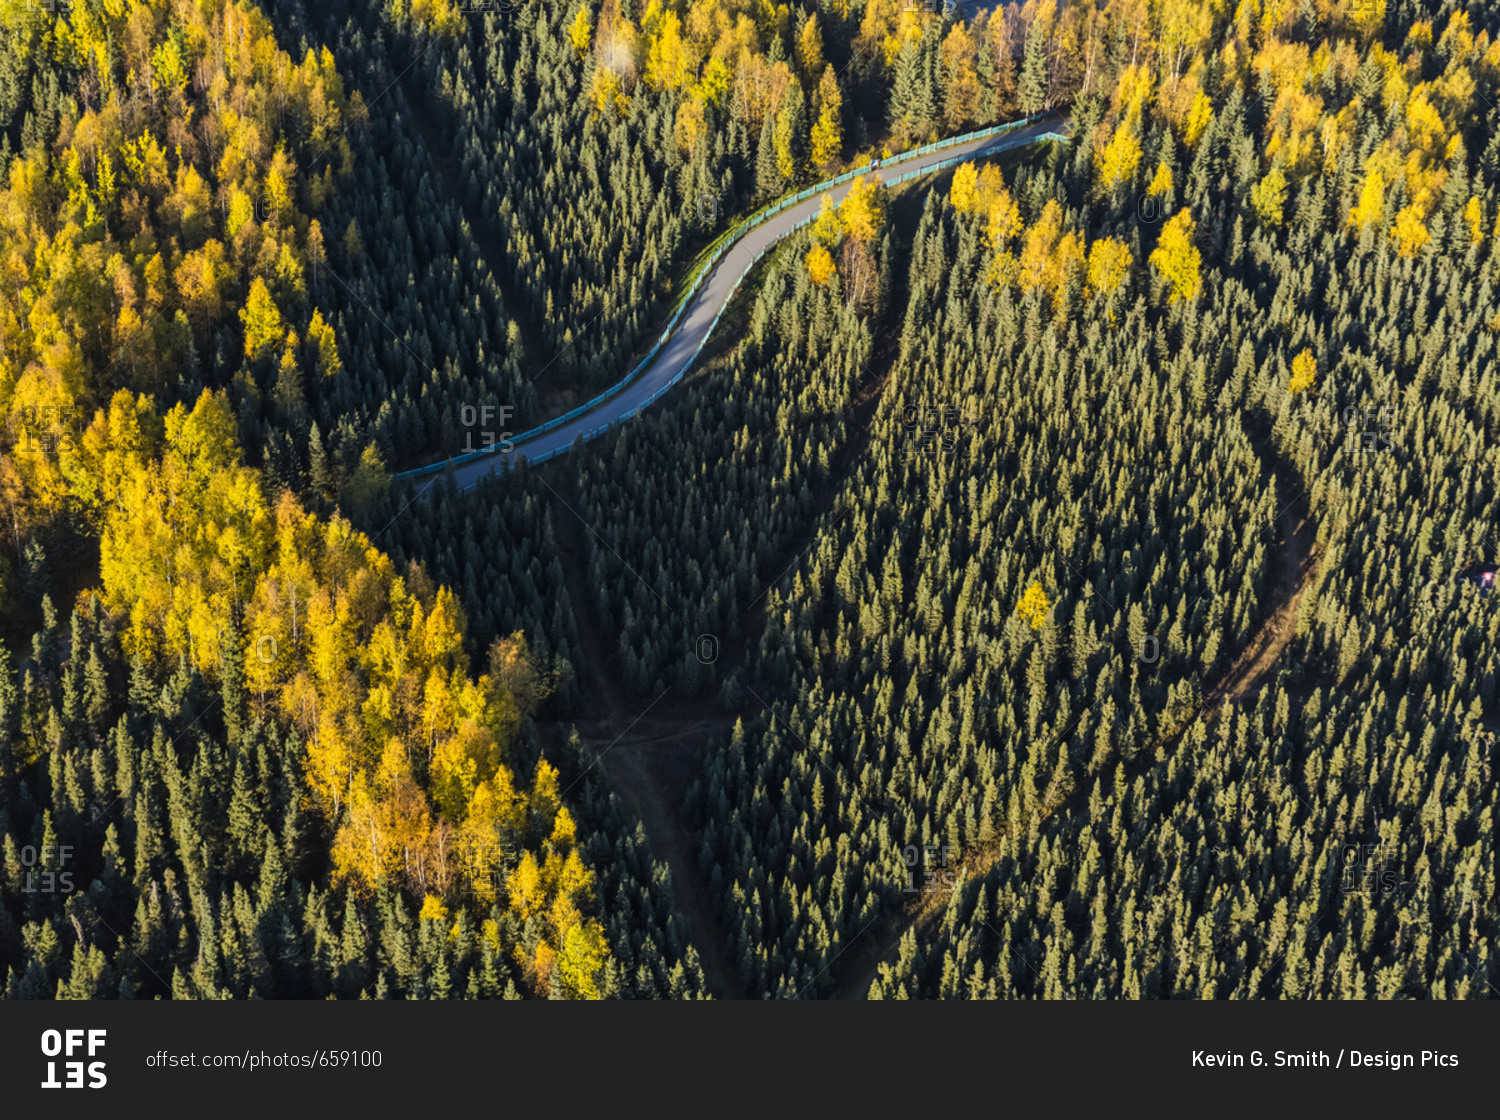 Aerial View Of The Chester Creek Bike Trail Winding Through Spruce And Birch Forests; South-Central Alaska; Anchorage, Alaska, United States Of America